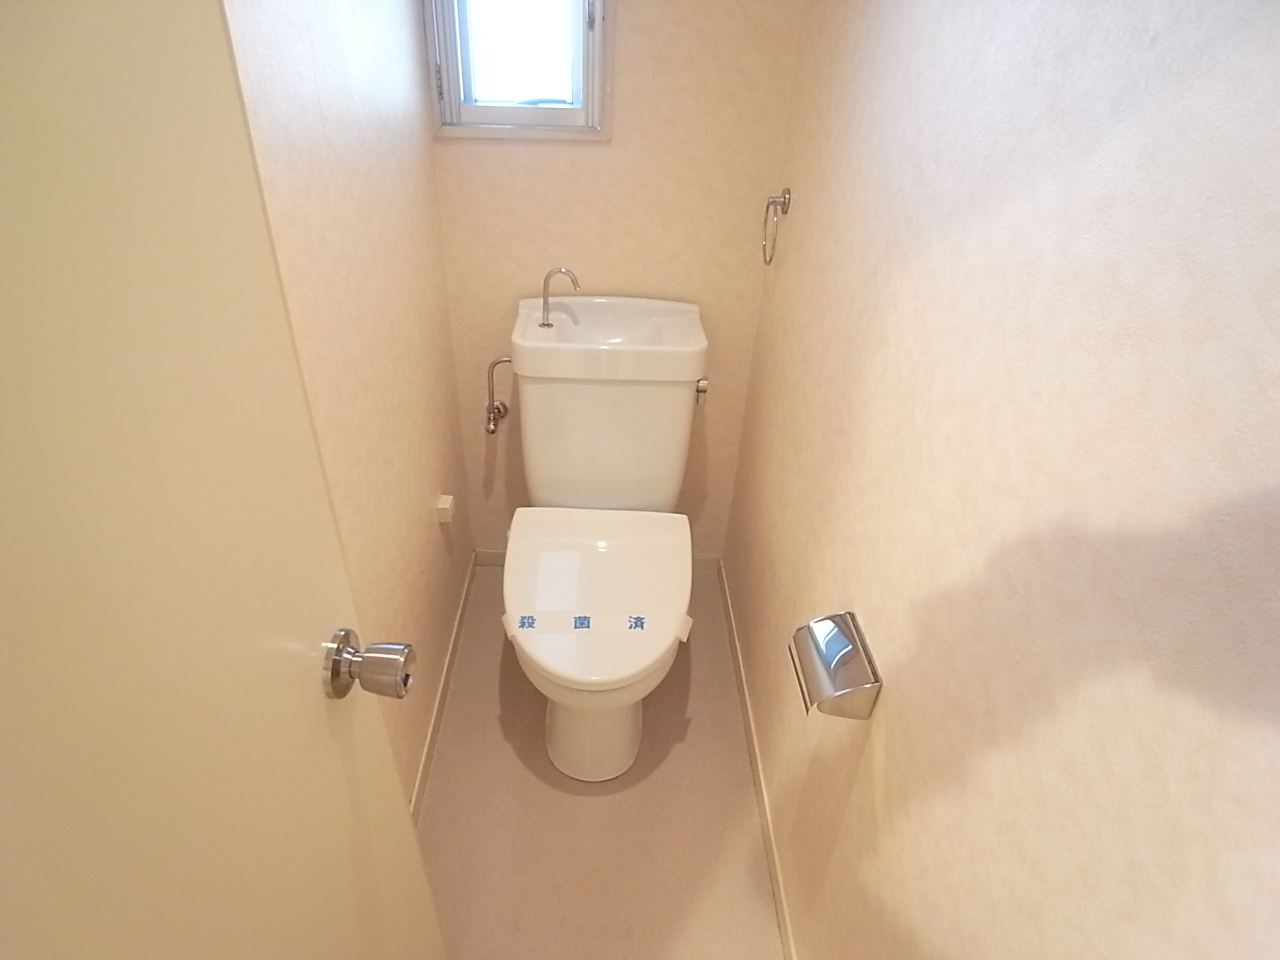 Toilet. There is a window, Ventilation is easy to toilet